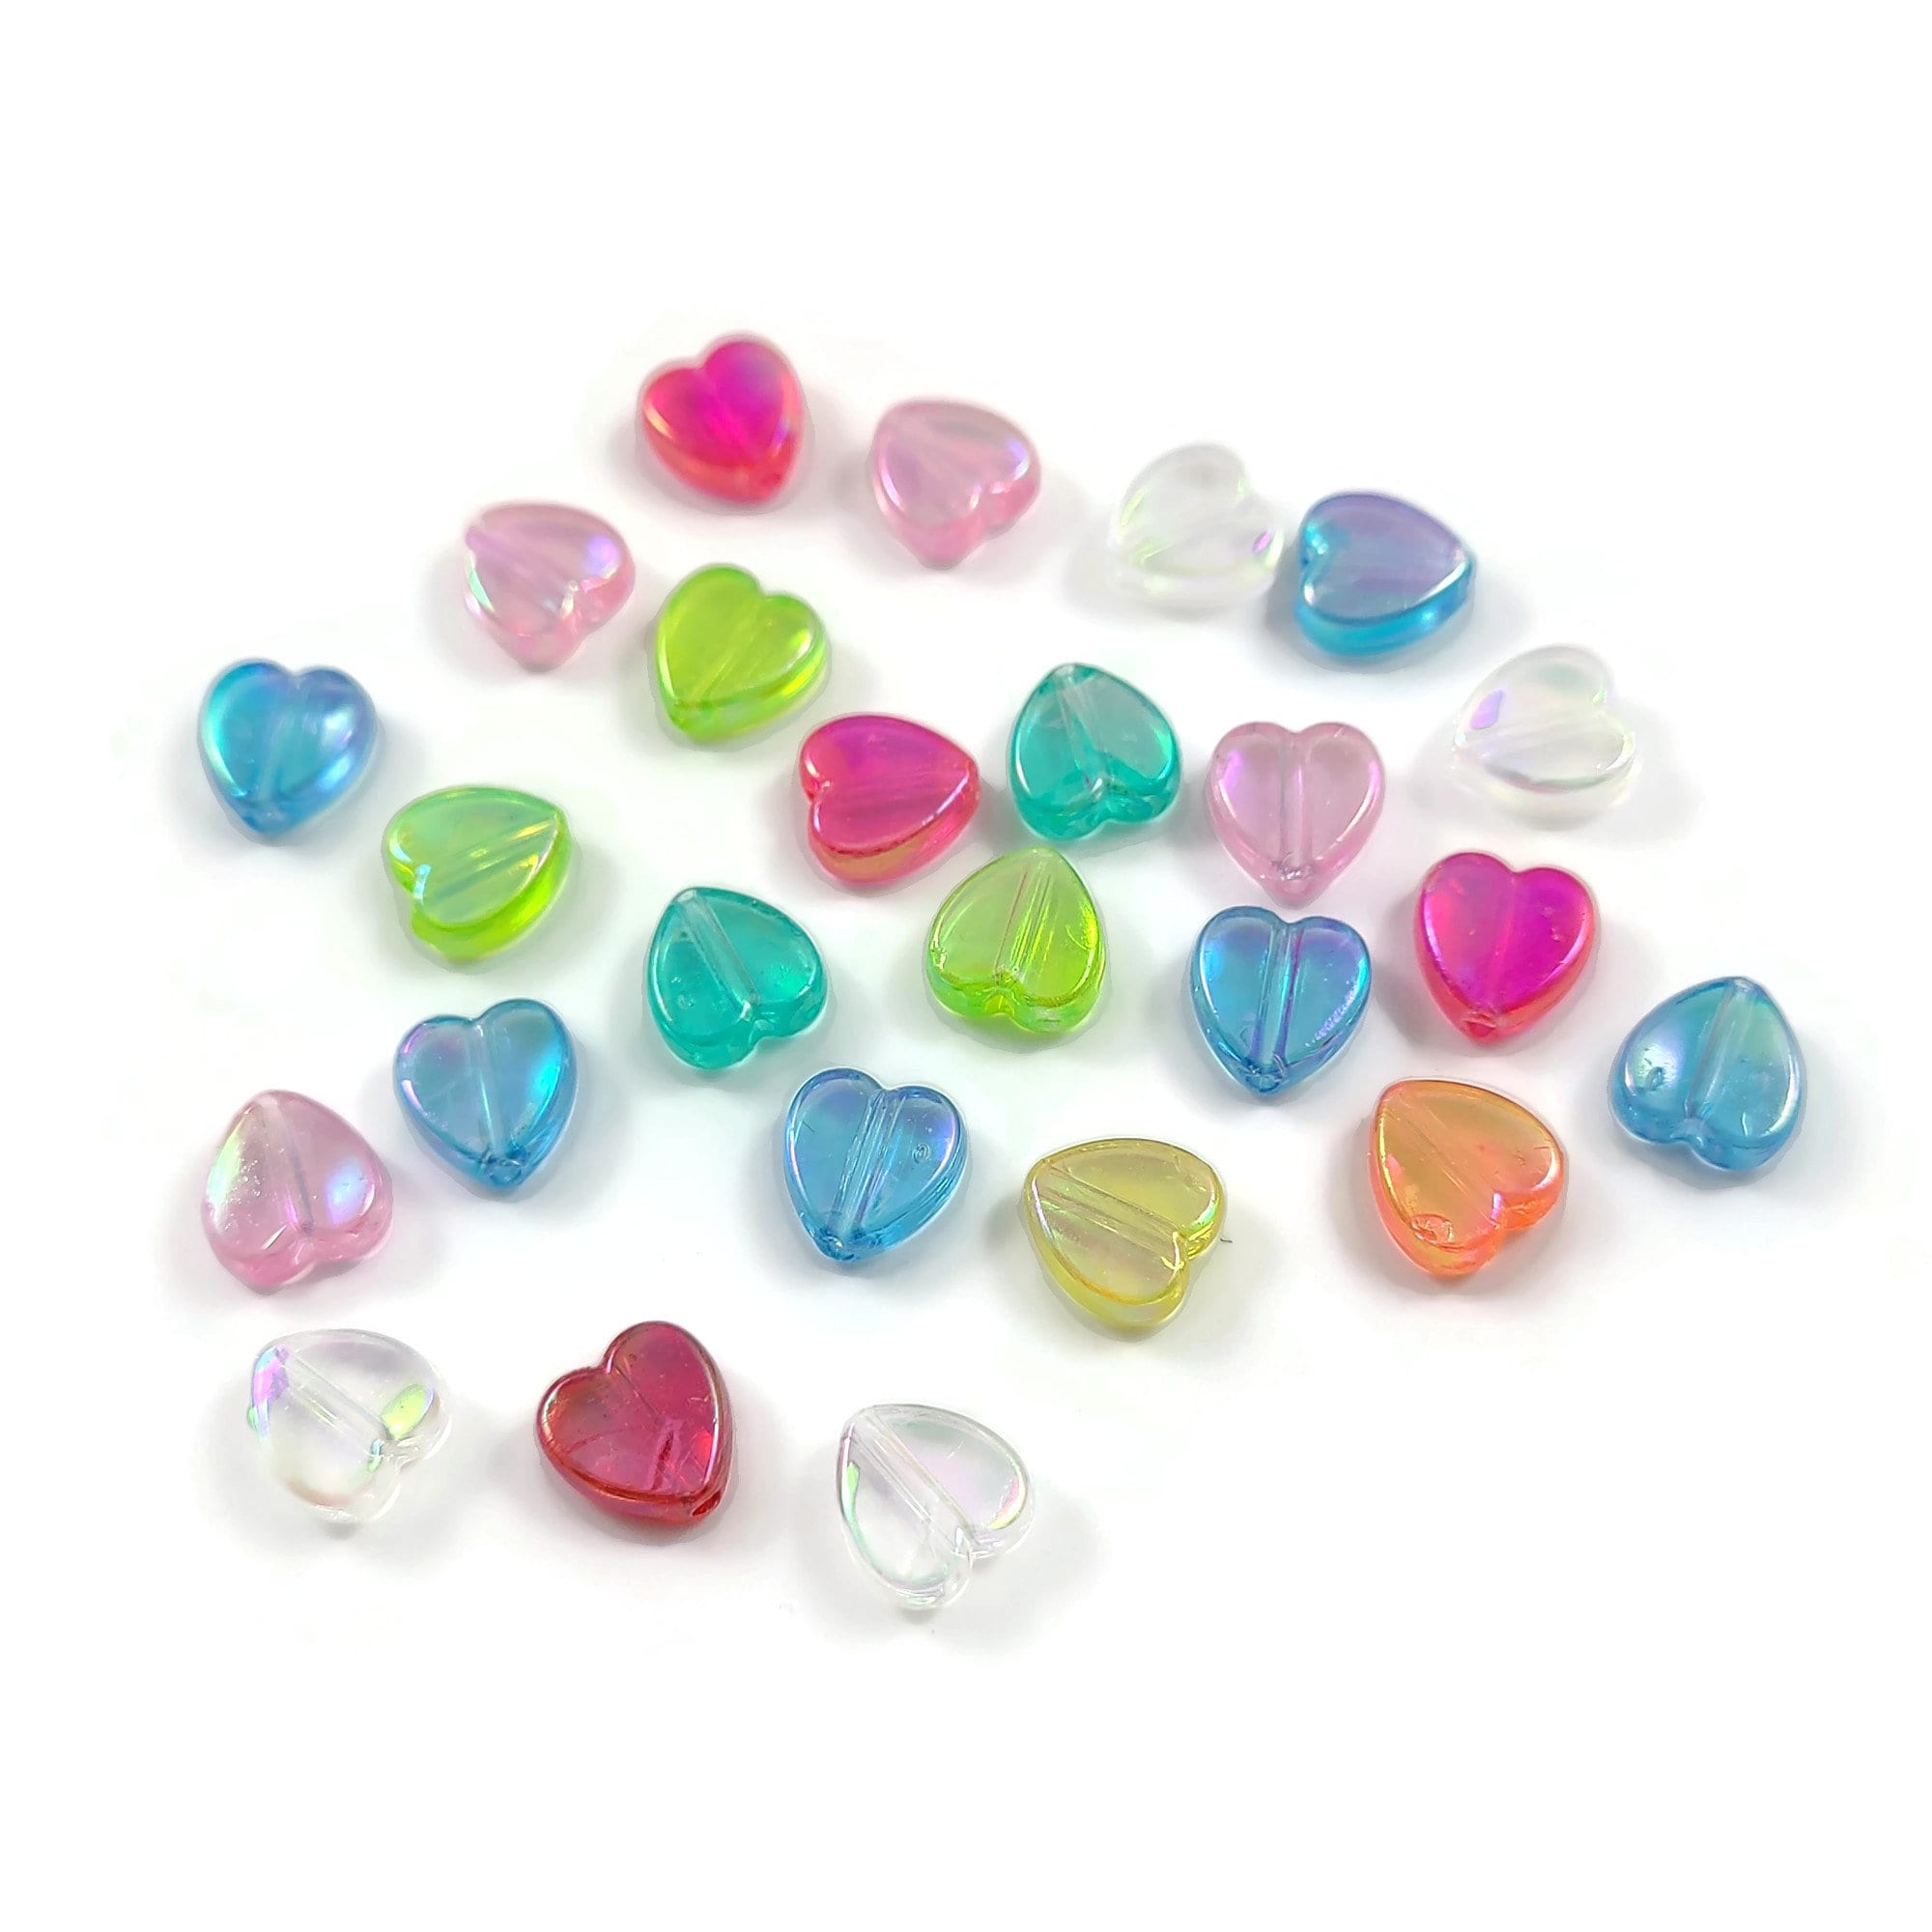 25 mixed transparent pearly heart beads, Assorted 8mm acrylic beads for jewelry making